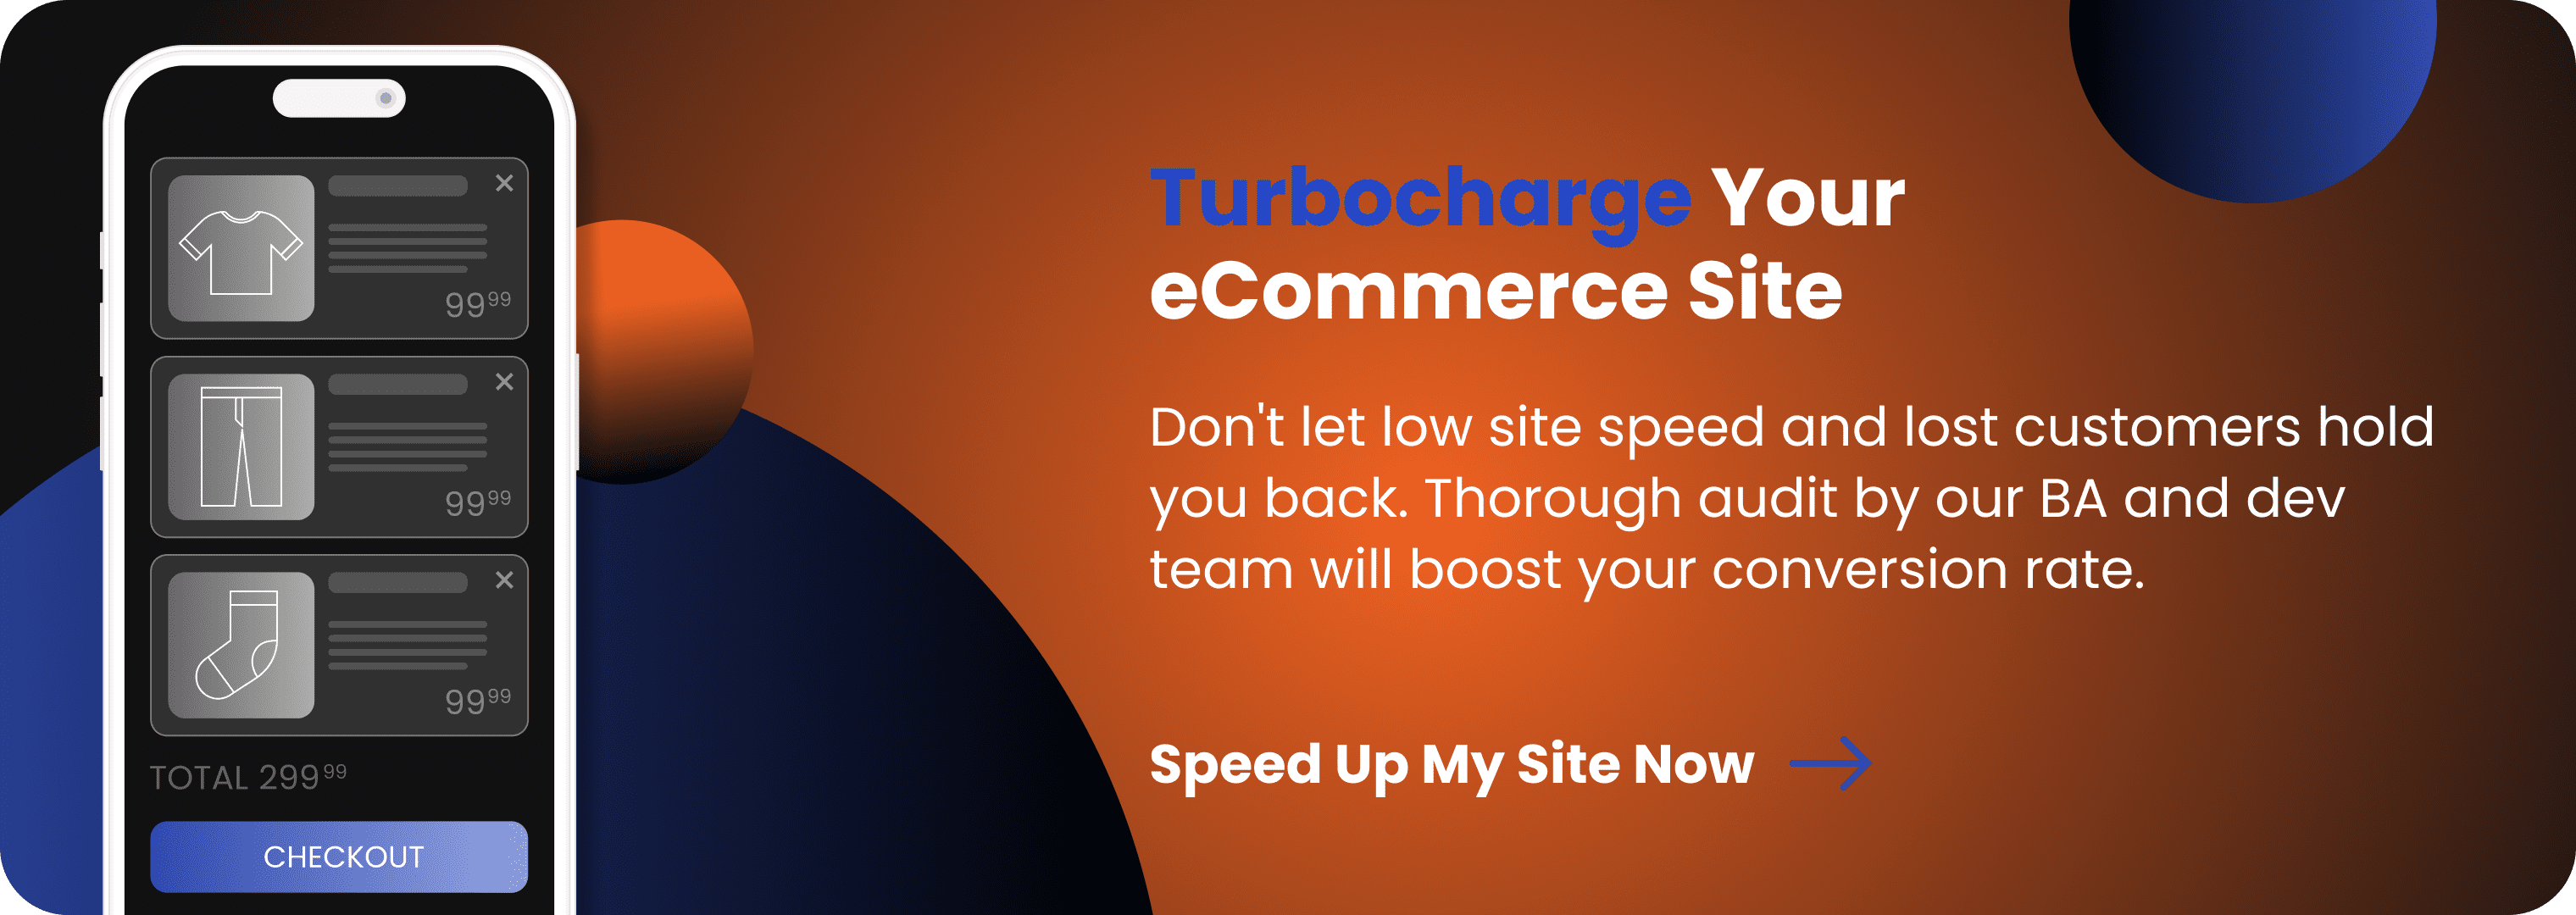 Performance - Turbocharge Your eCommerce Site